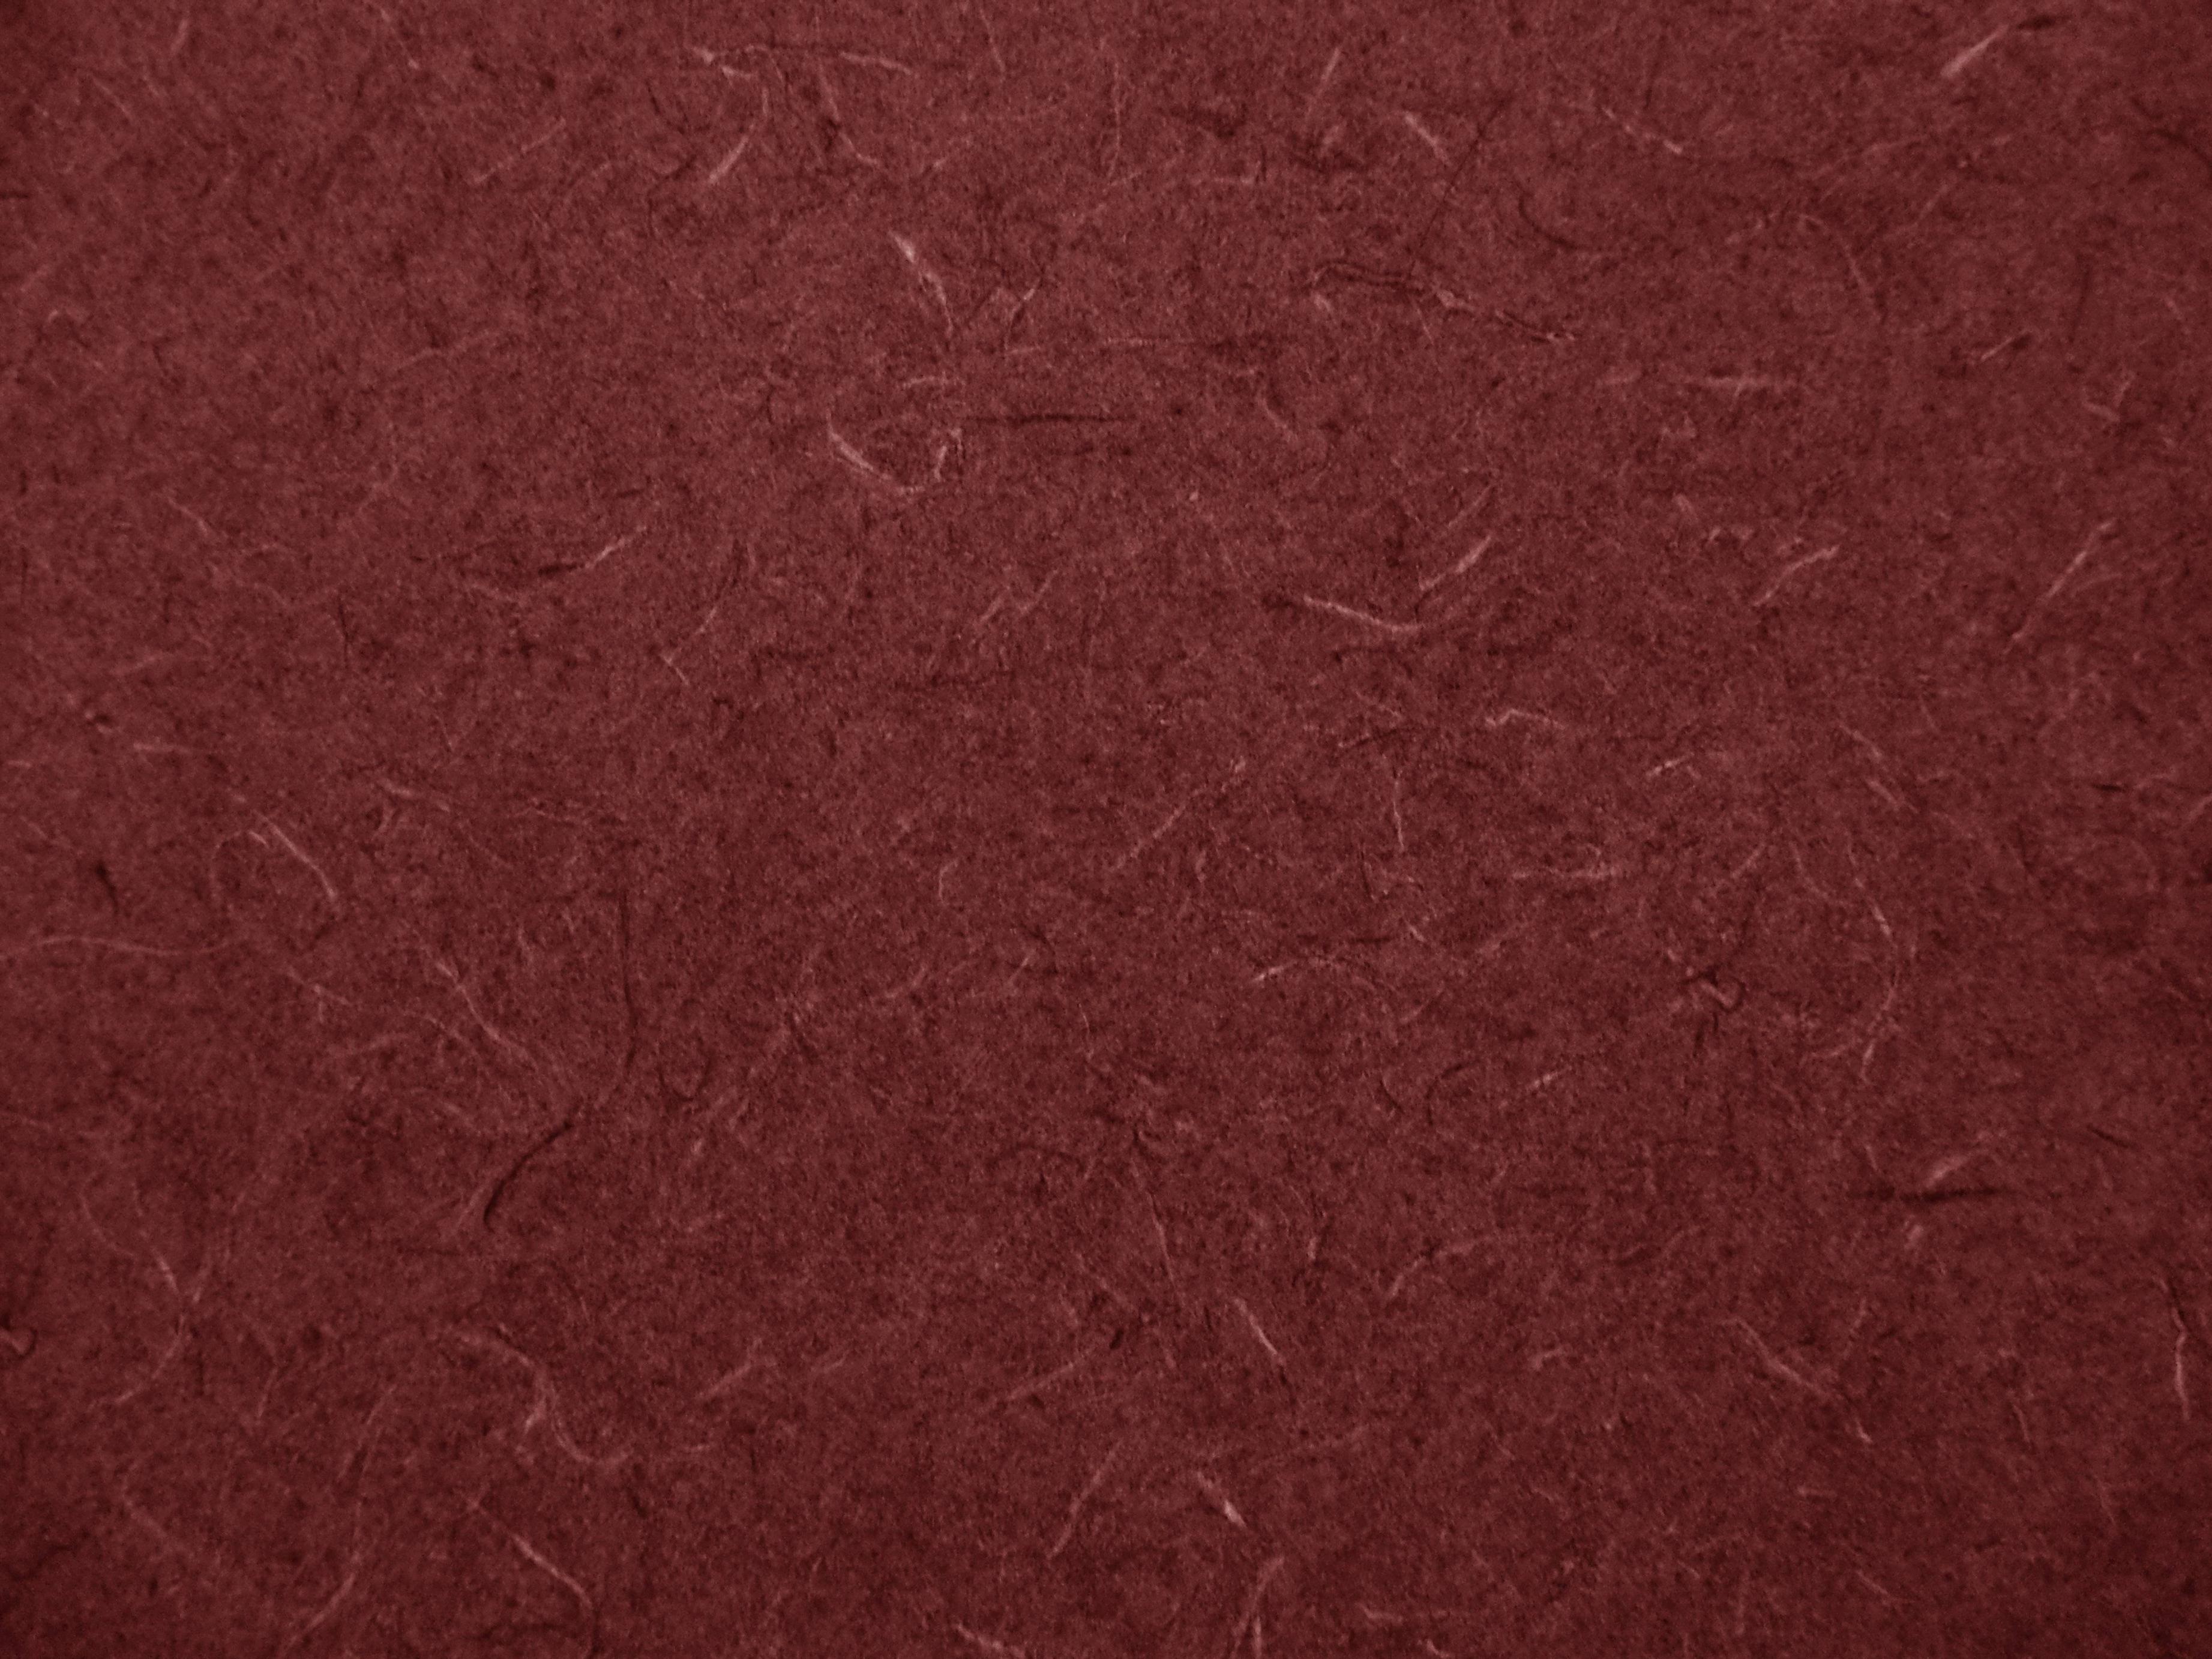 Maroon Abstract Pattern Laminate Countertop Texture Picture. Free